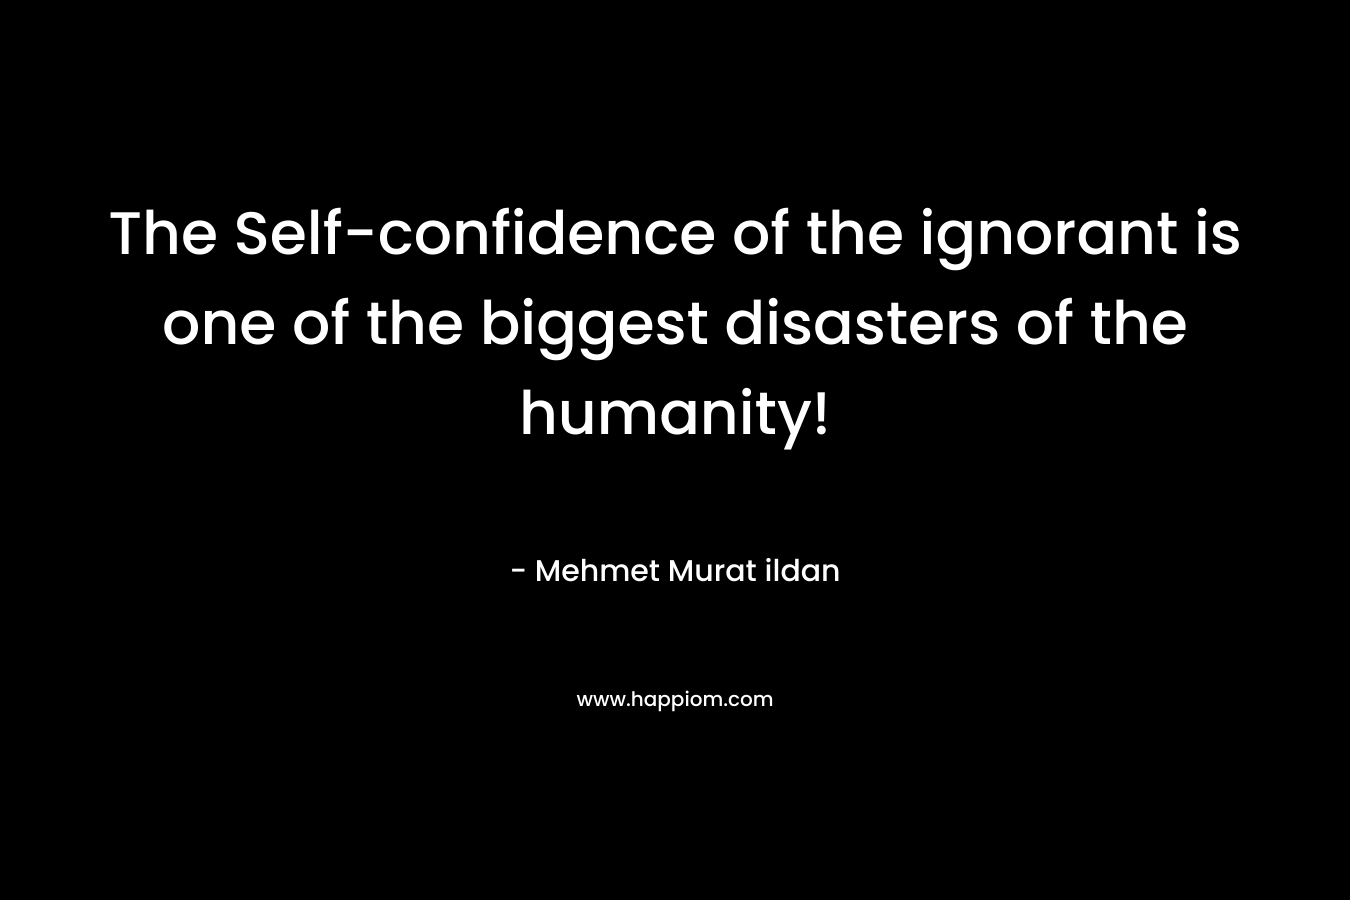 The Self-confidence of the ignorant is one of the biggest disasters of the humanity!